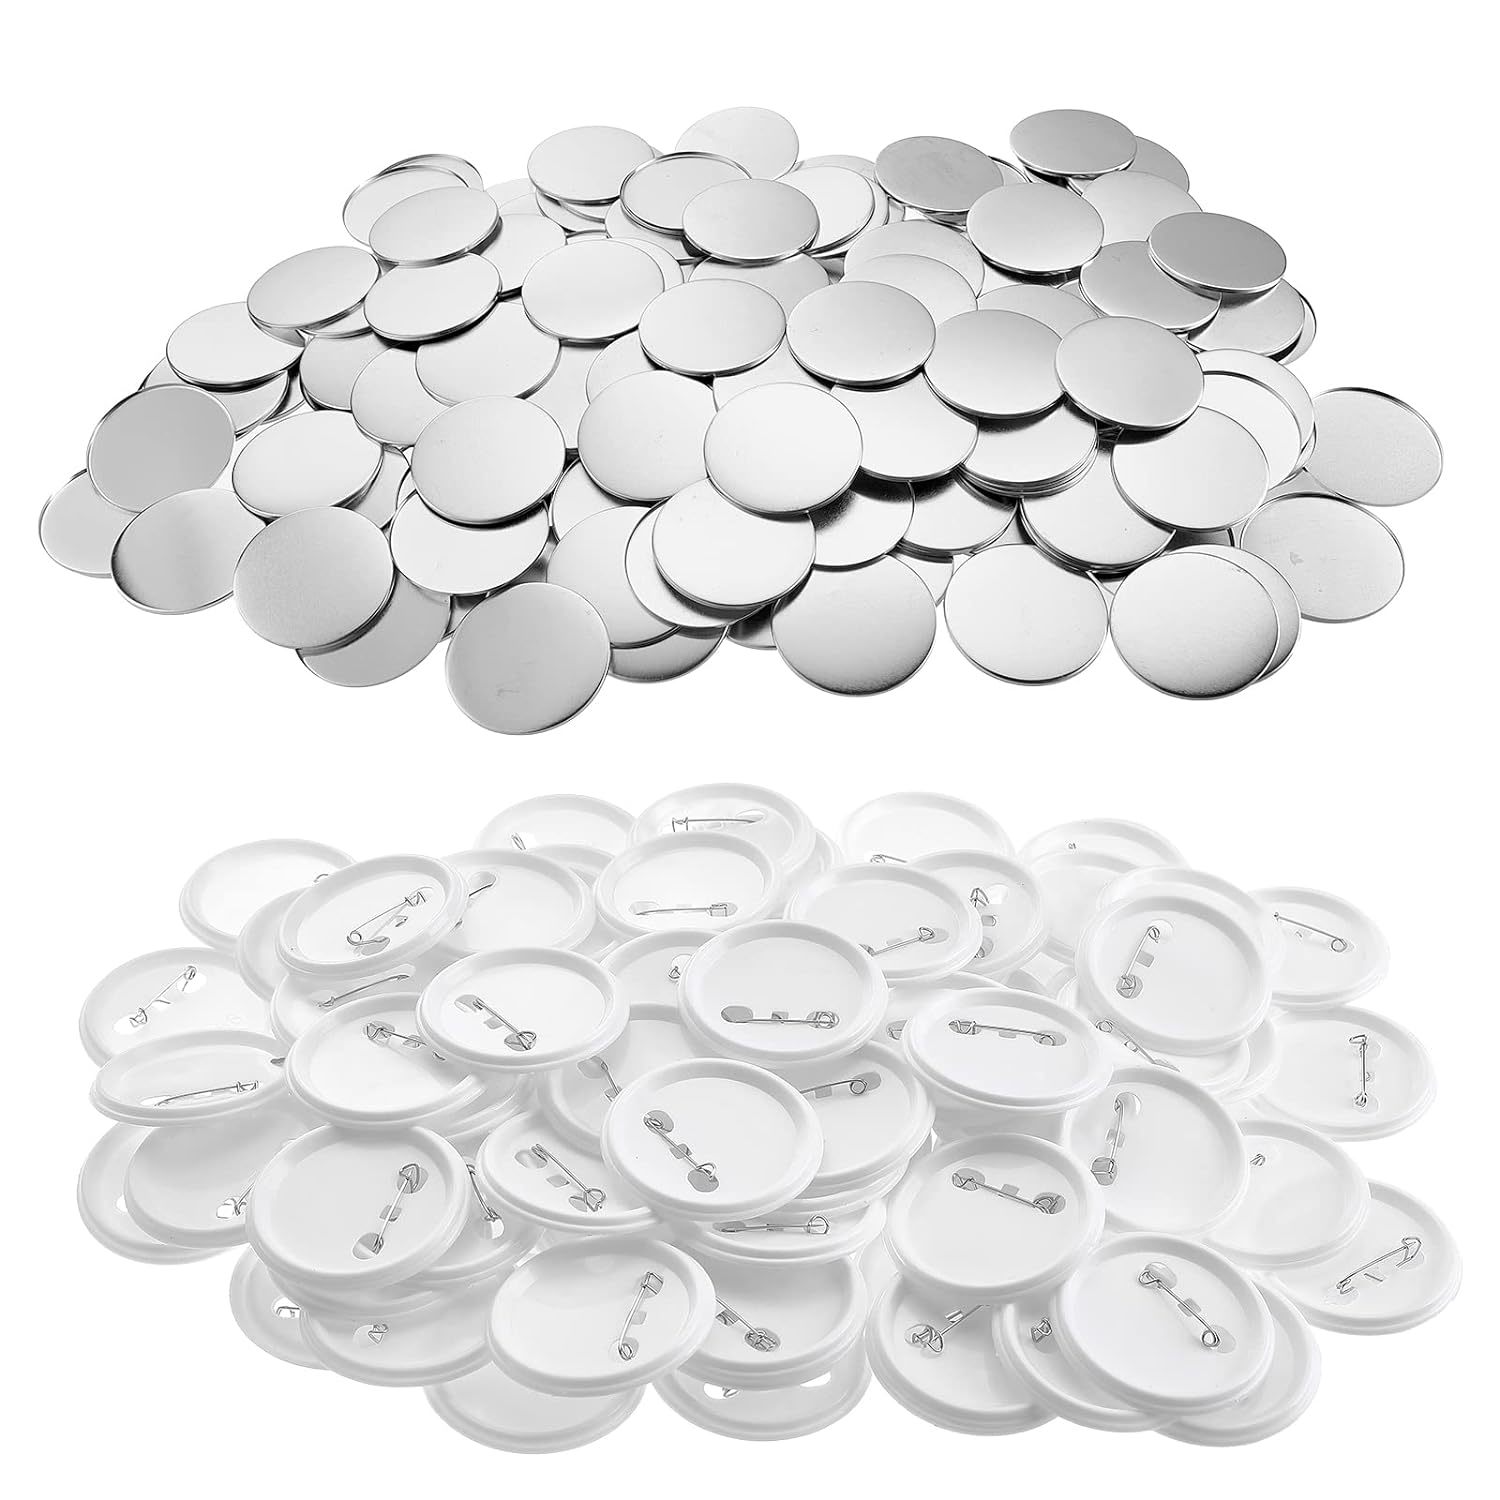 100 Sets 75mm/3 inch Button Making Supplies, Blank Pin Back Button Parts for But